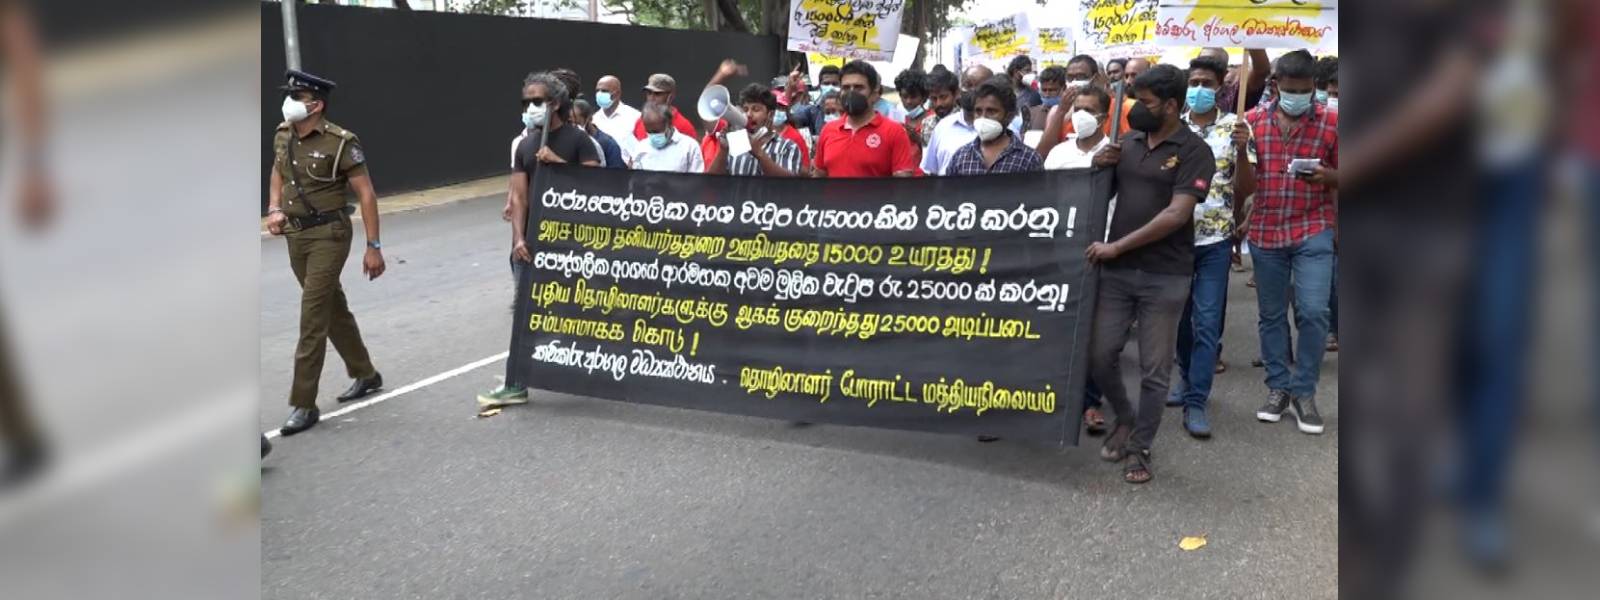 Multiple protests staged in Colombo